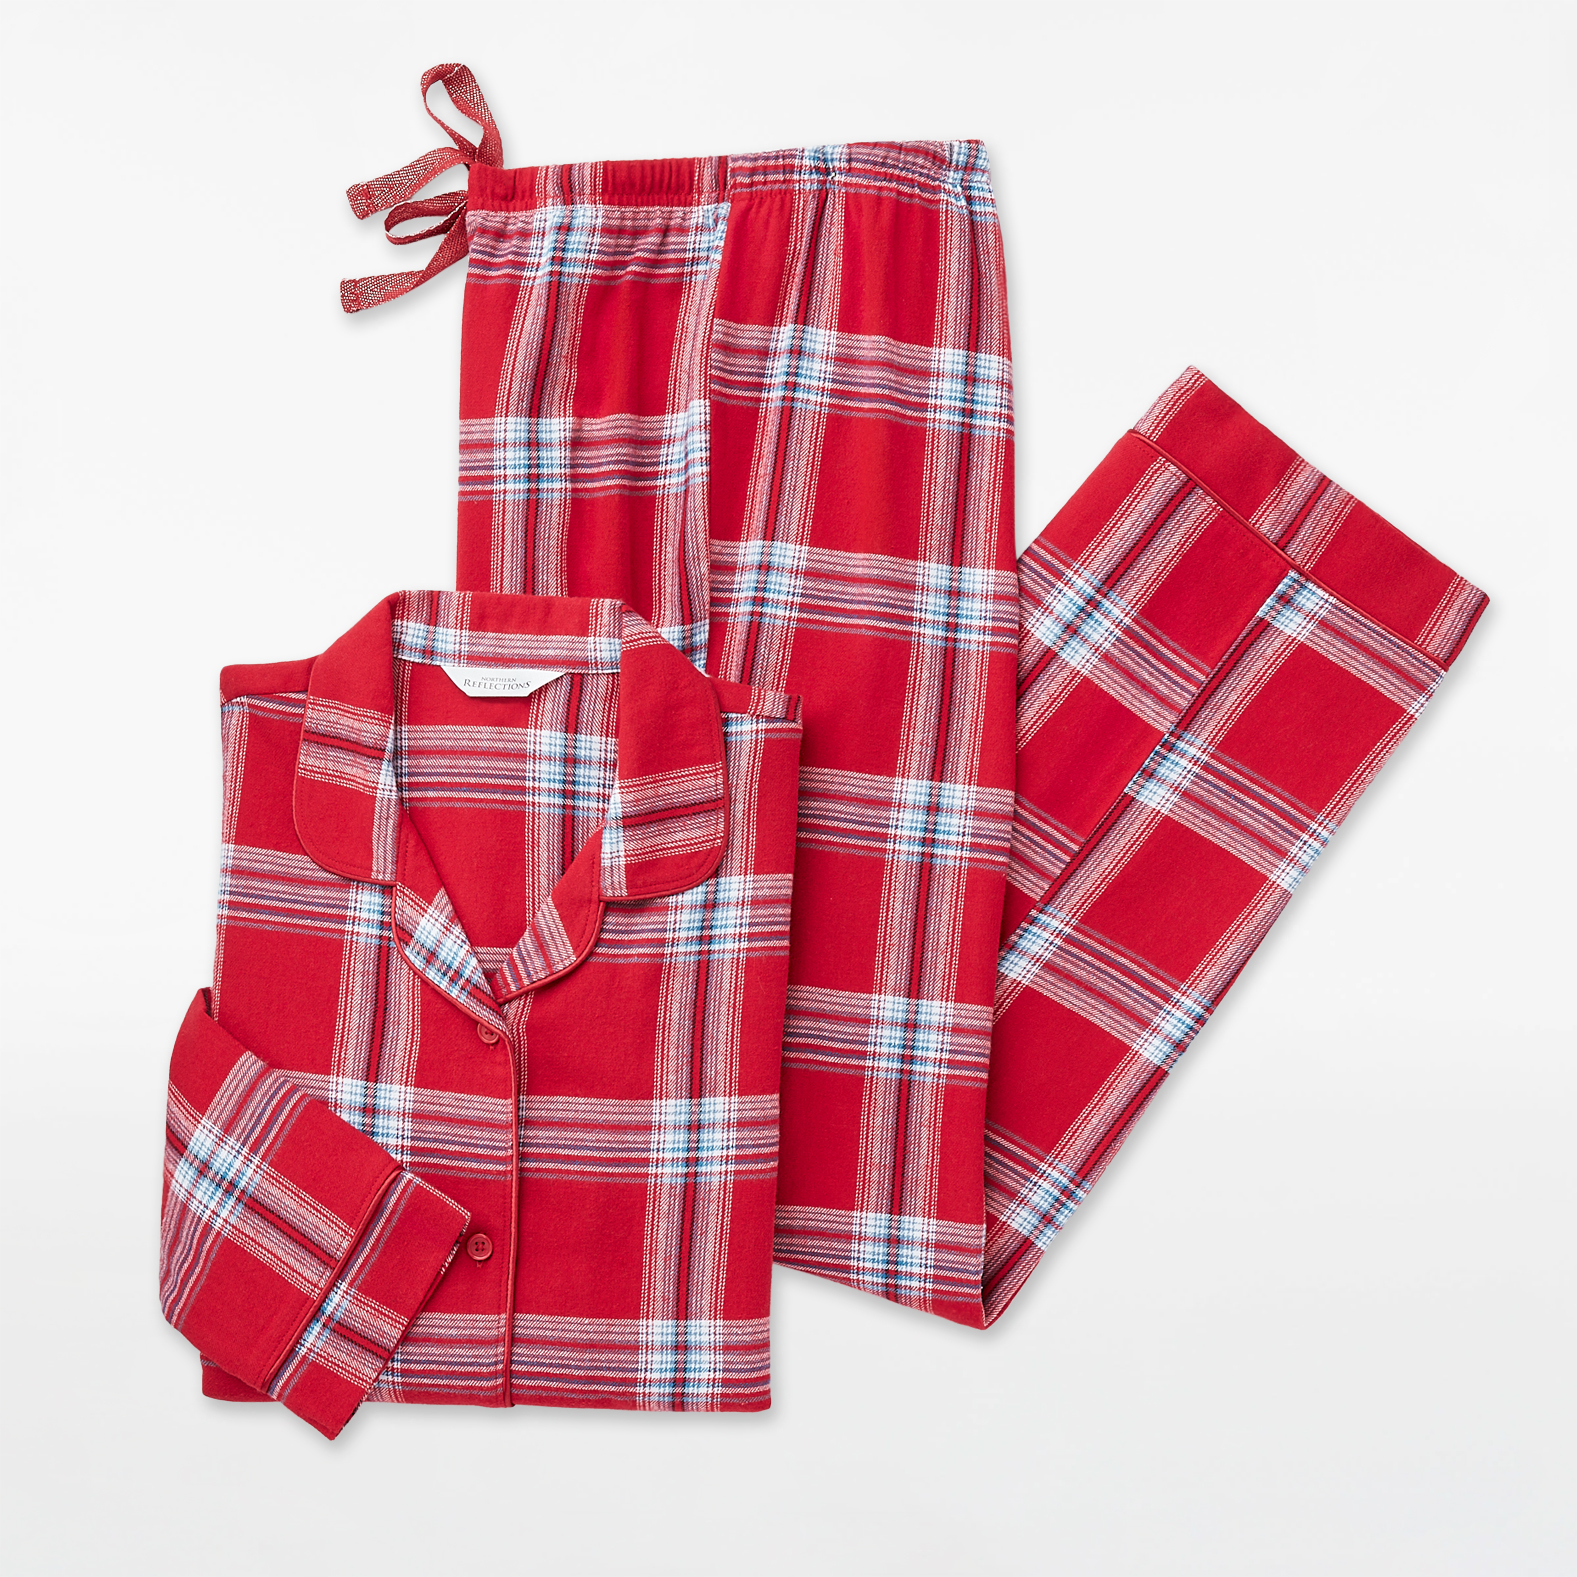 Cozy Holiday Pyjamas On Our Gift List - Northern Reflections